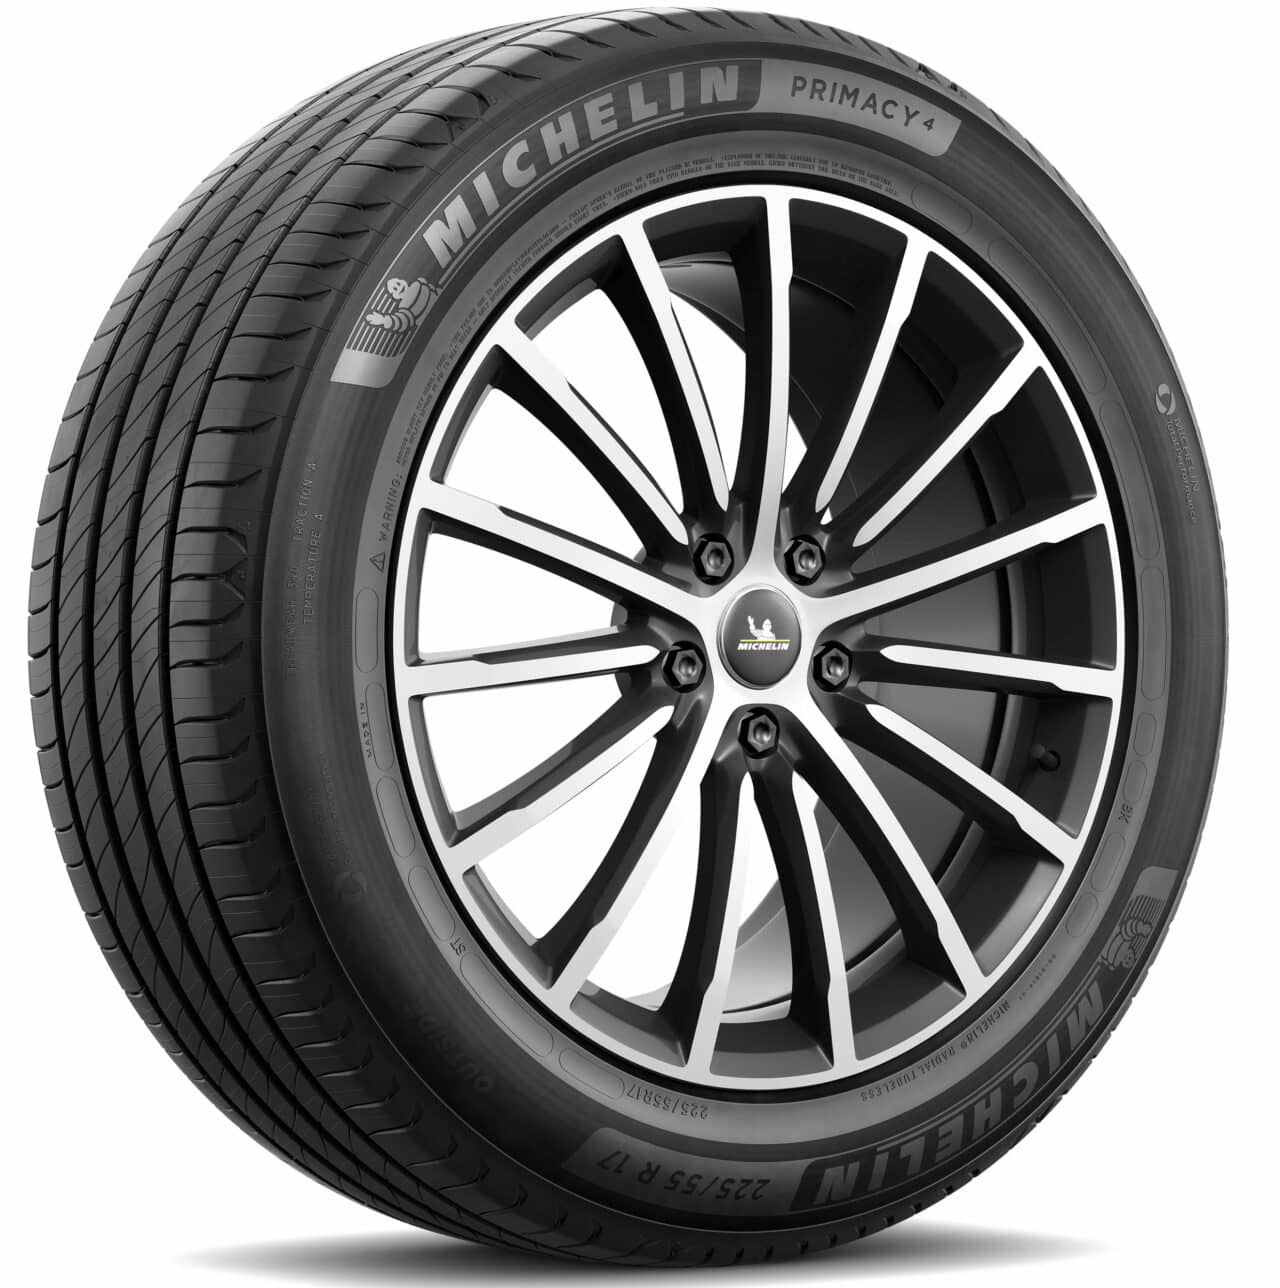 Michelin Tyres - Wheels and Tyres | Herb Morgan Tyres